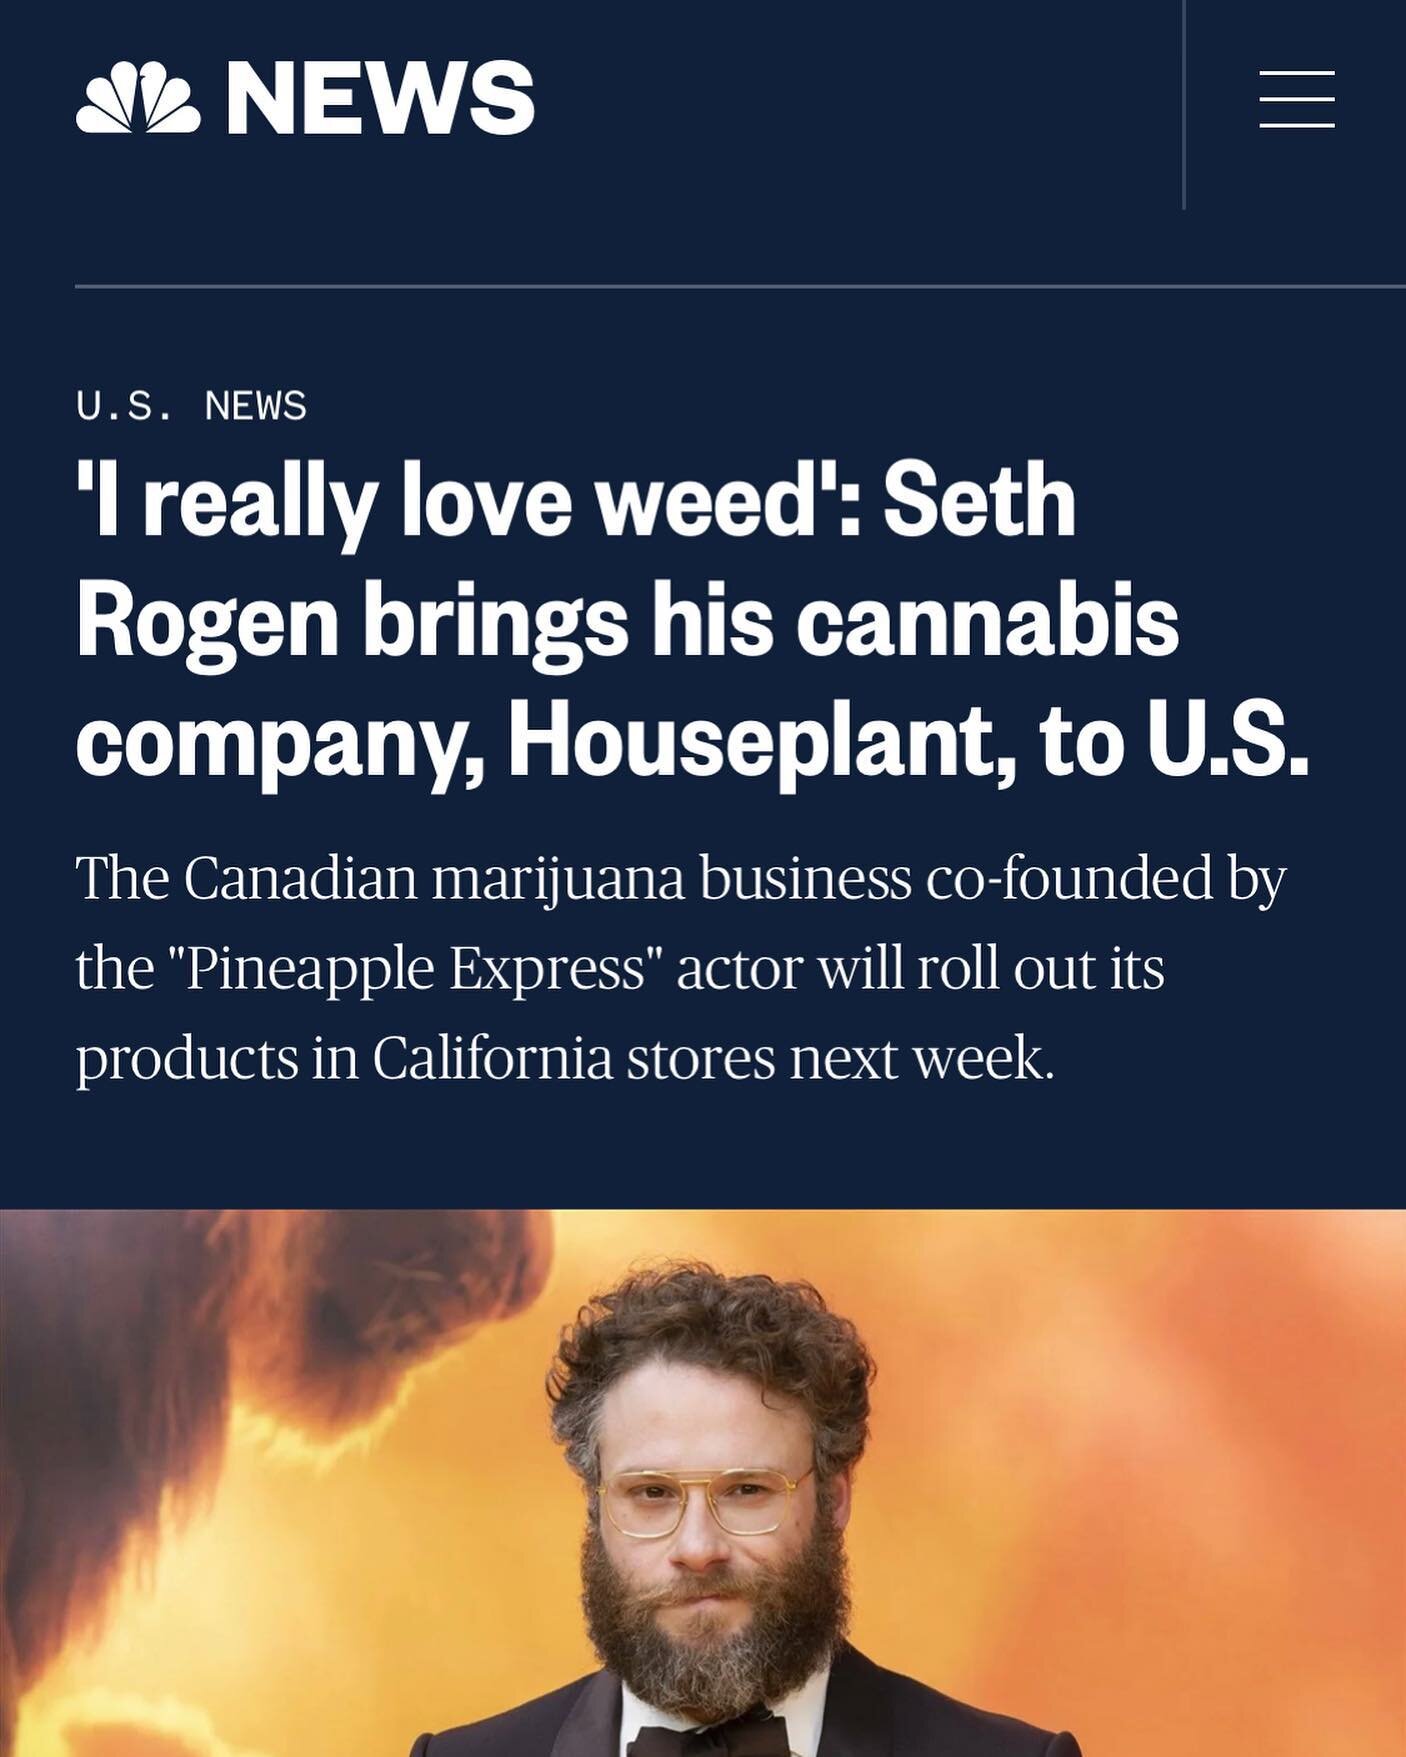 @sethrogen really loves #cannabis 👍 read via @nbcnews about his company coming to the states 

#celebritiesincannabis #cannabisnews #cannabiscommunity #pineappleexpress #cannabisculture